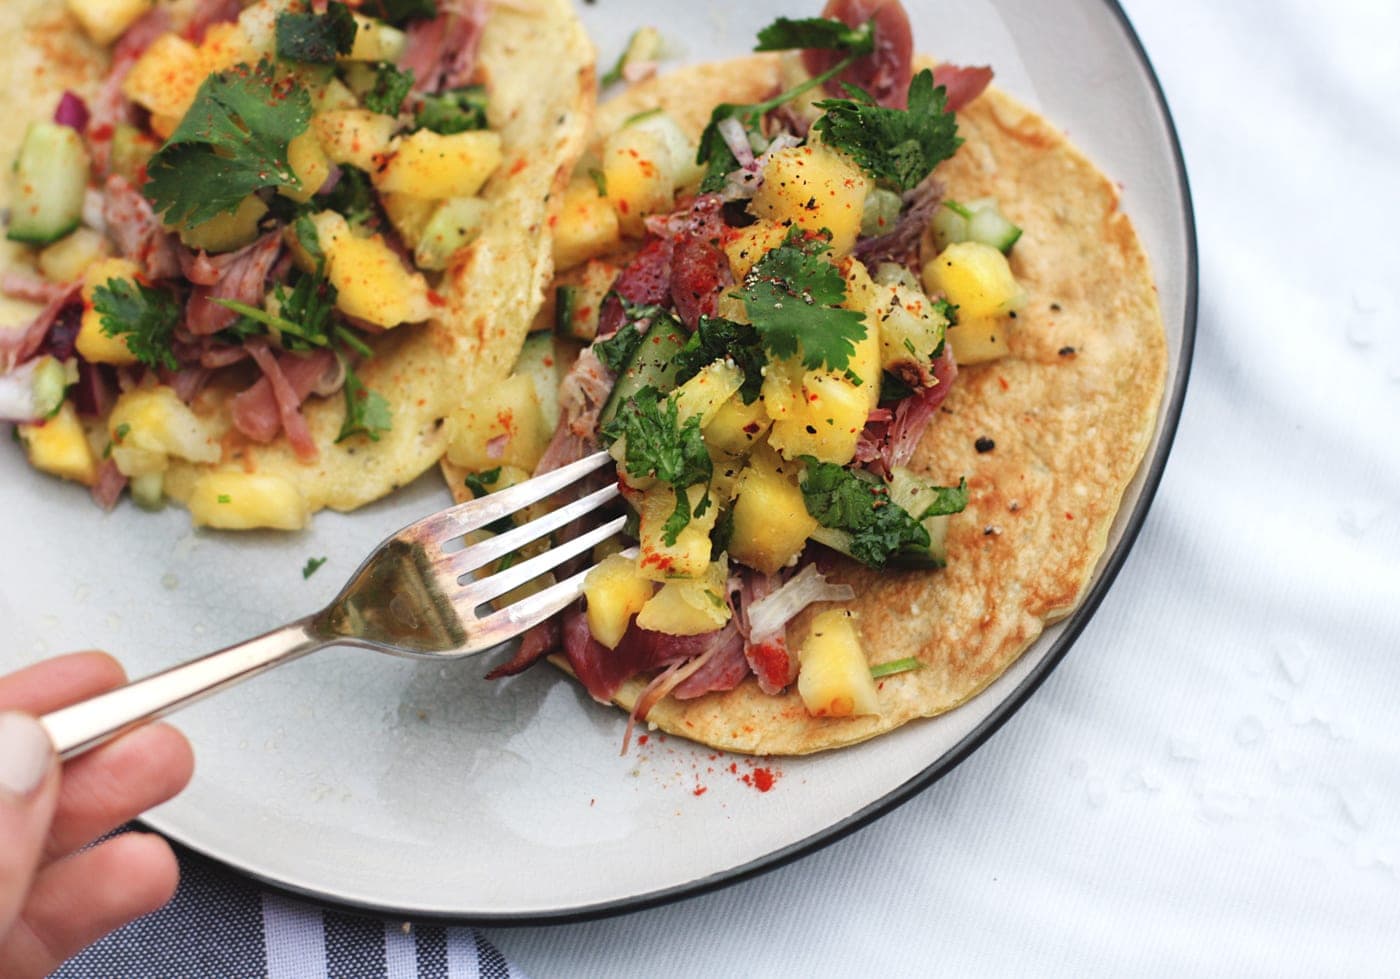 Paleo ham tacos with pineapple salsa summer recipe | easy grain free, gluten free, dairy free meal